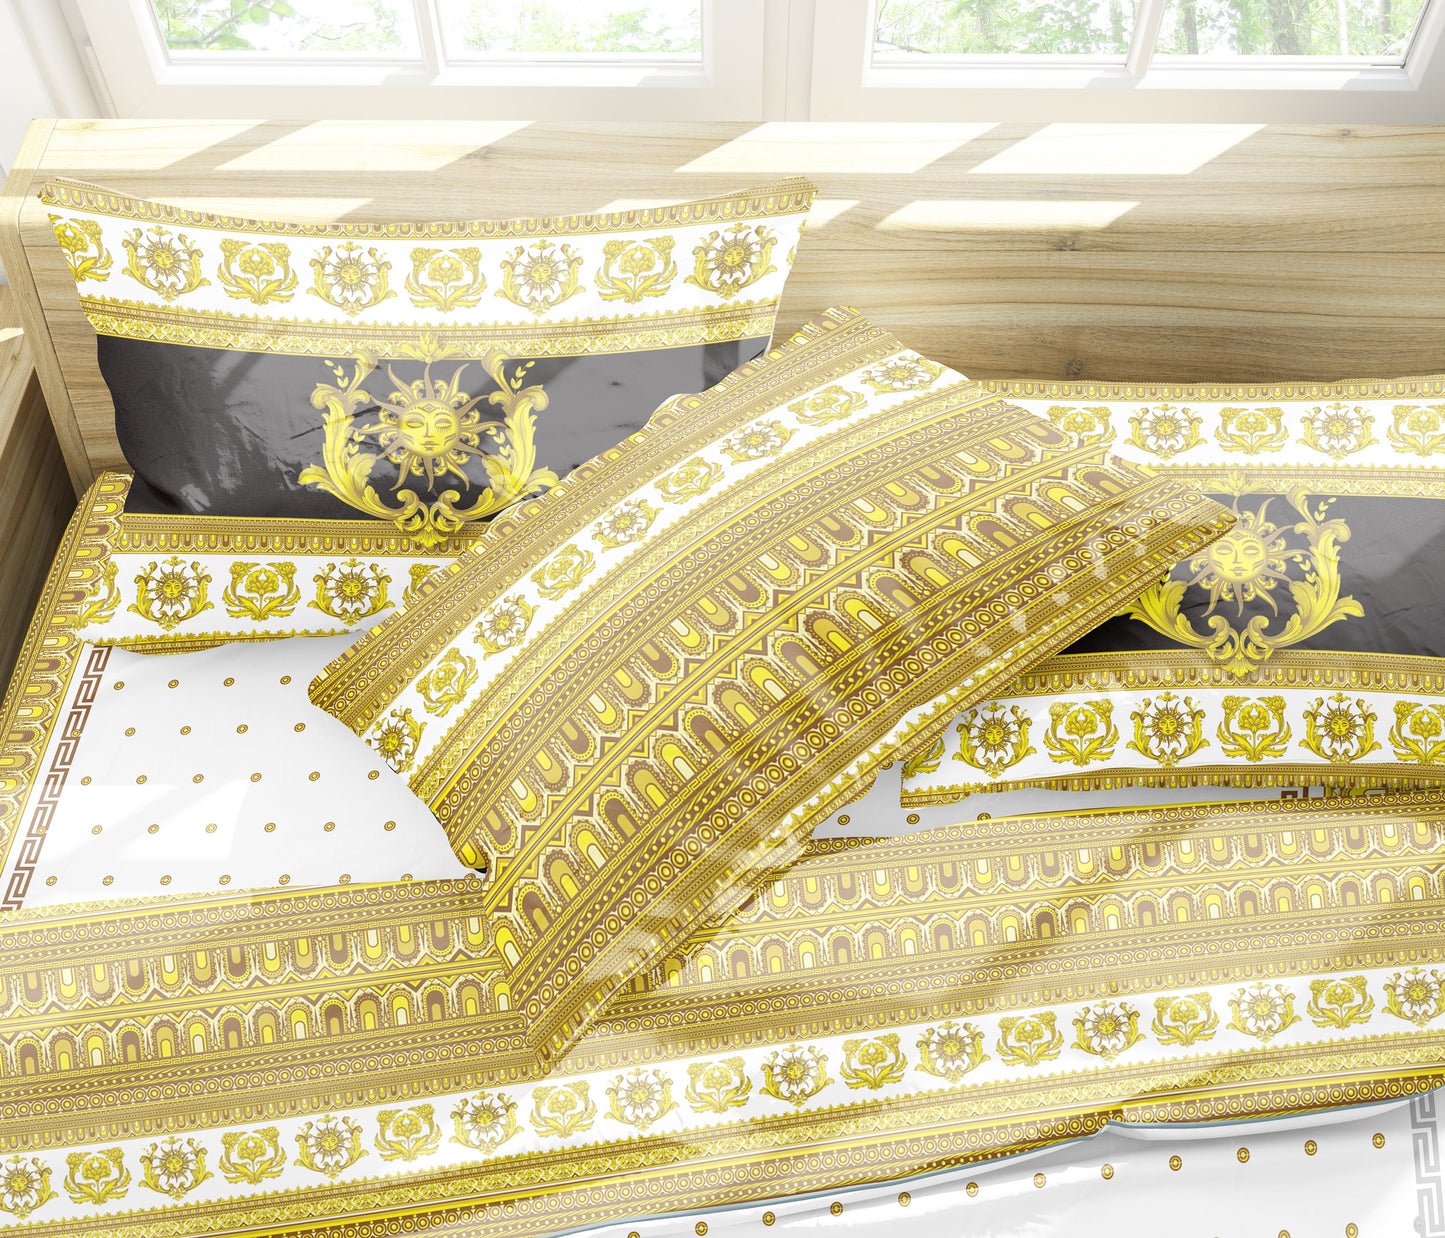 Baroque Eccentric Yellow Personalised Bedding set • your LOGO\letter can be placed • Reversible design • Cotton • microfiber • faux silk